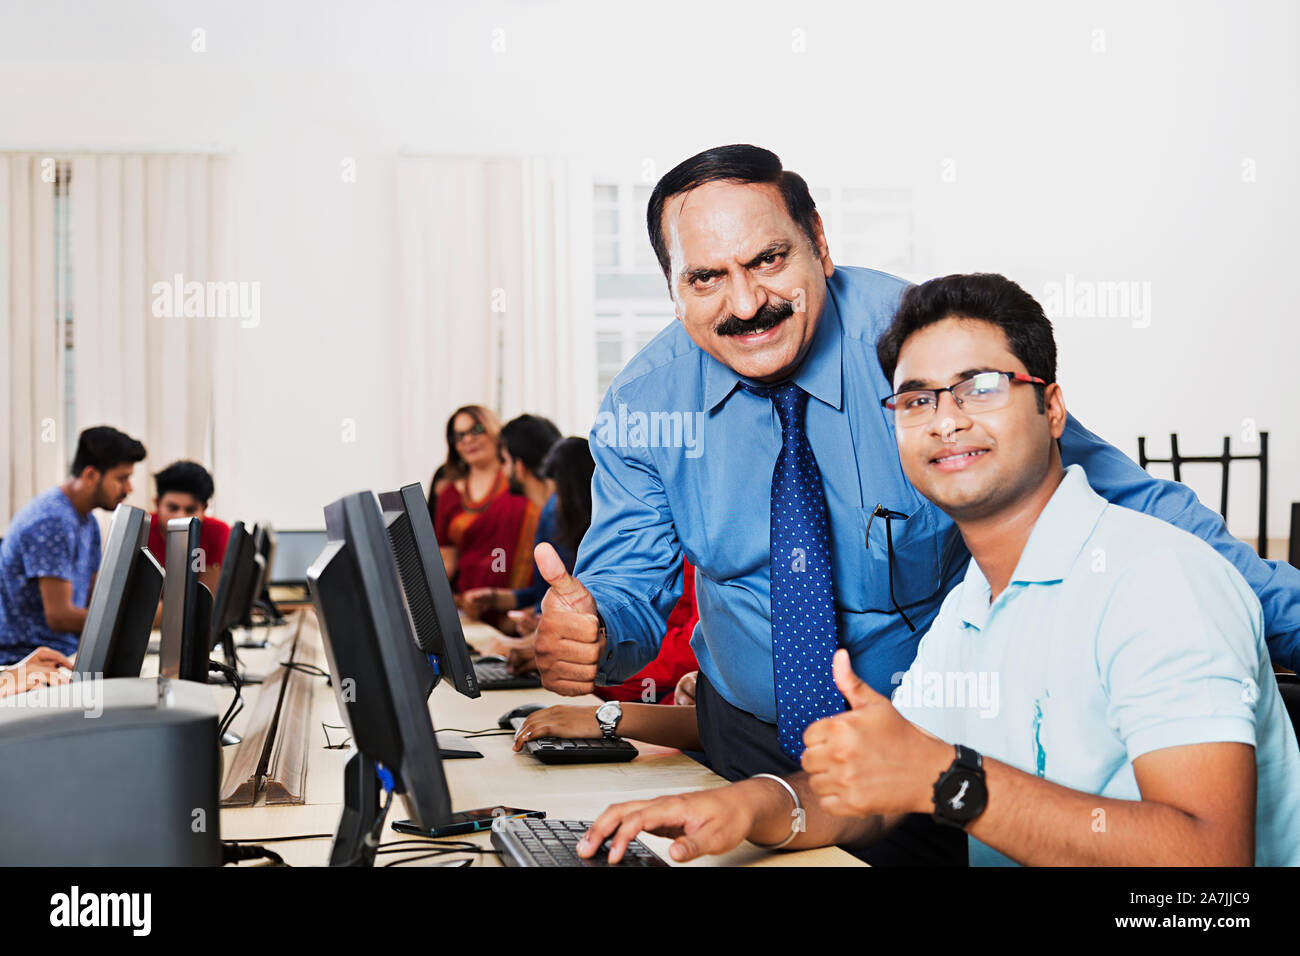 College Professor With Young-man Student Studying Computer And Showing Thumbs-up in Computer lab Stock Photo